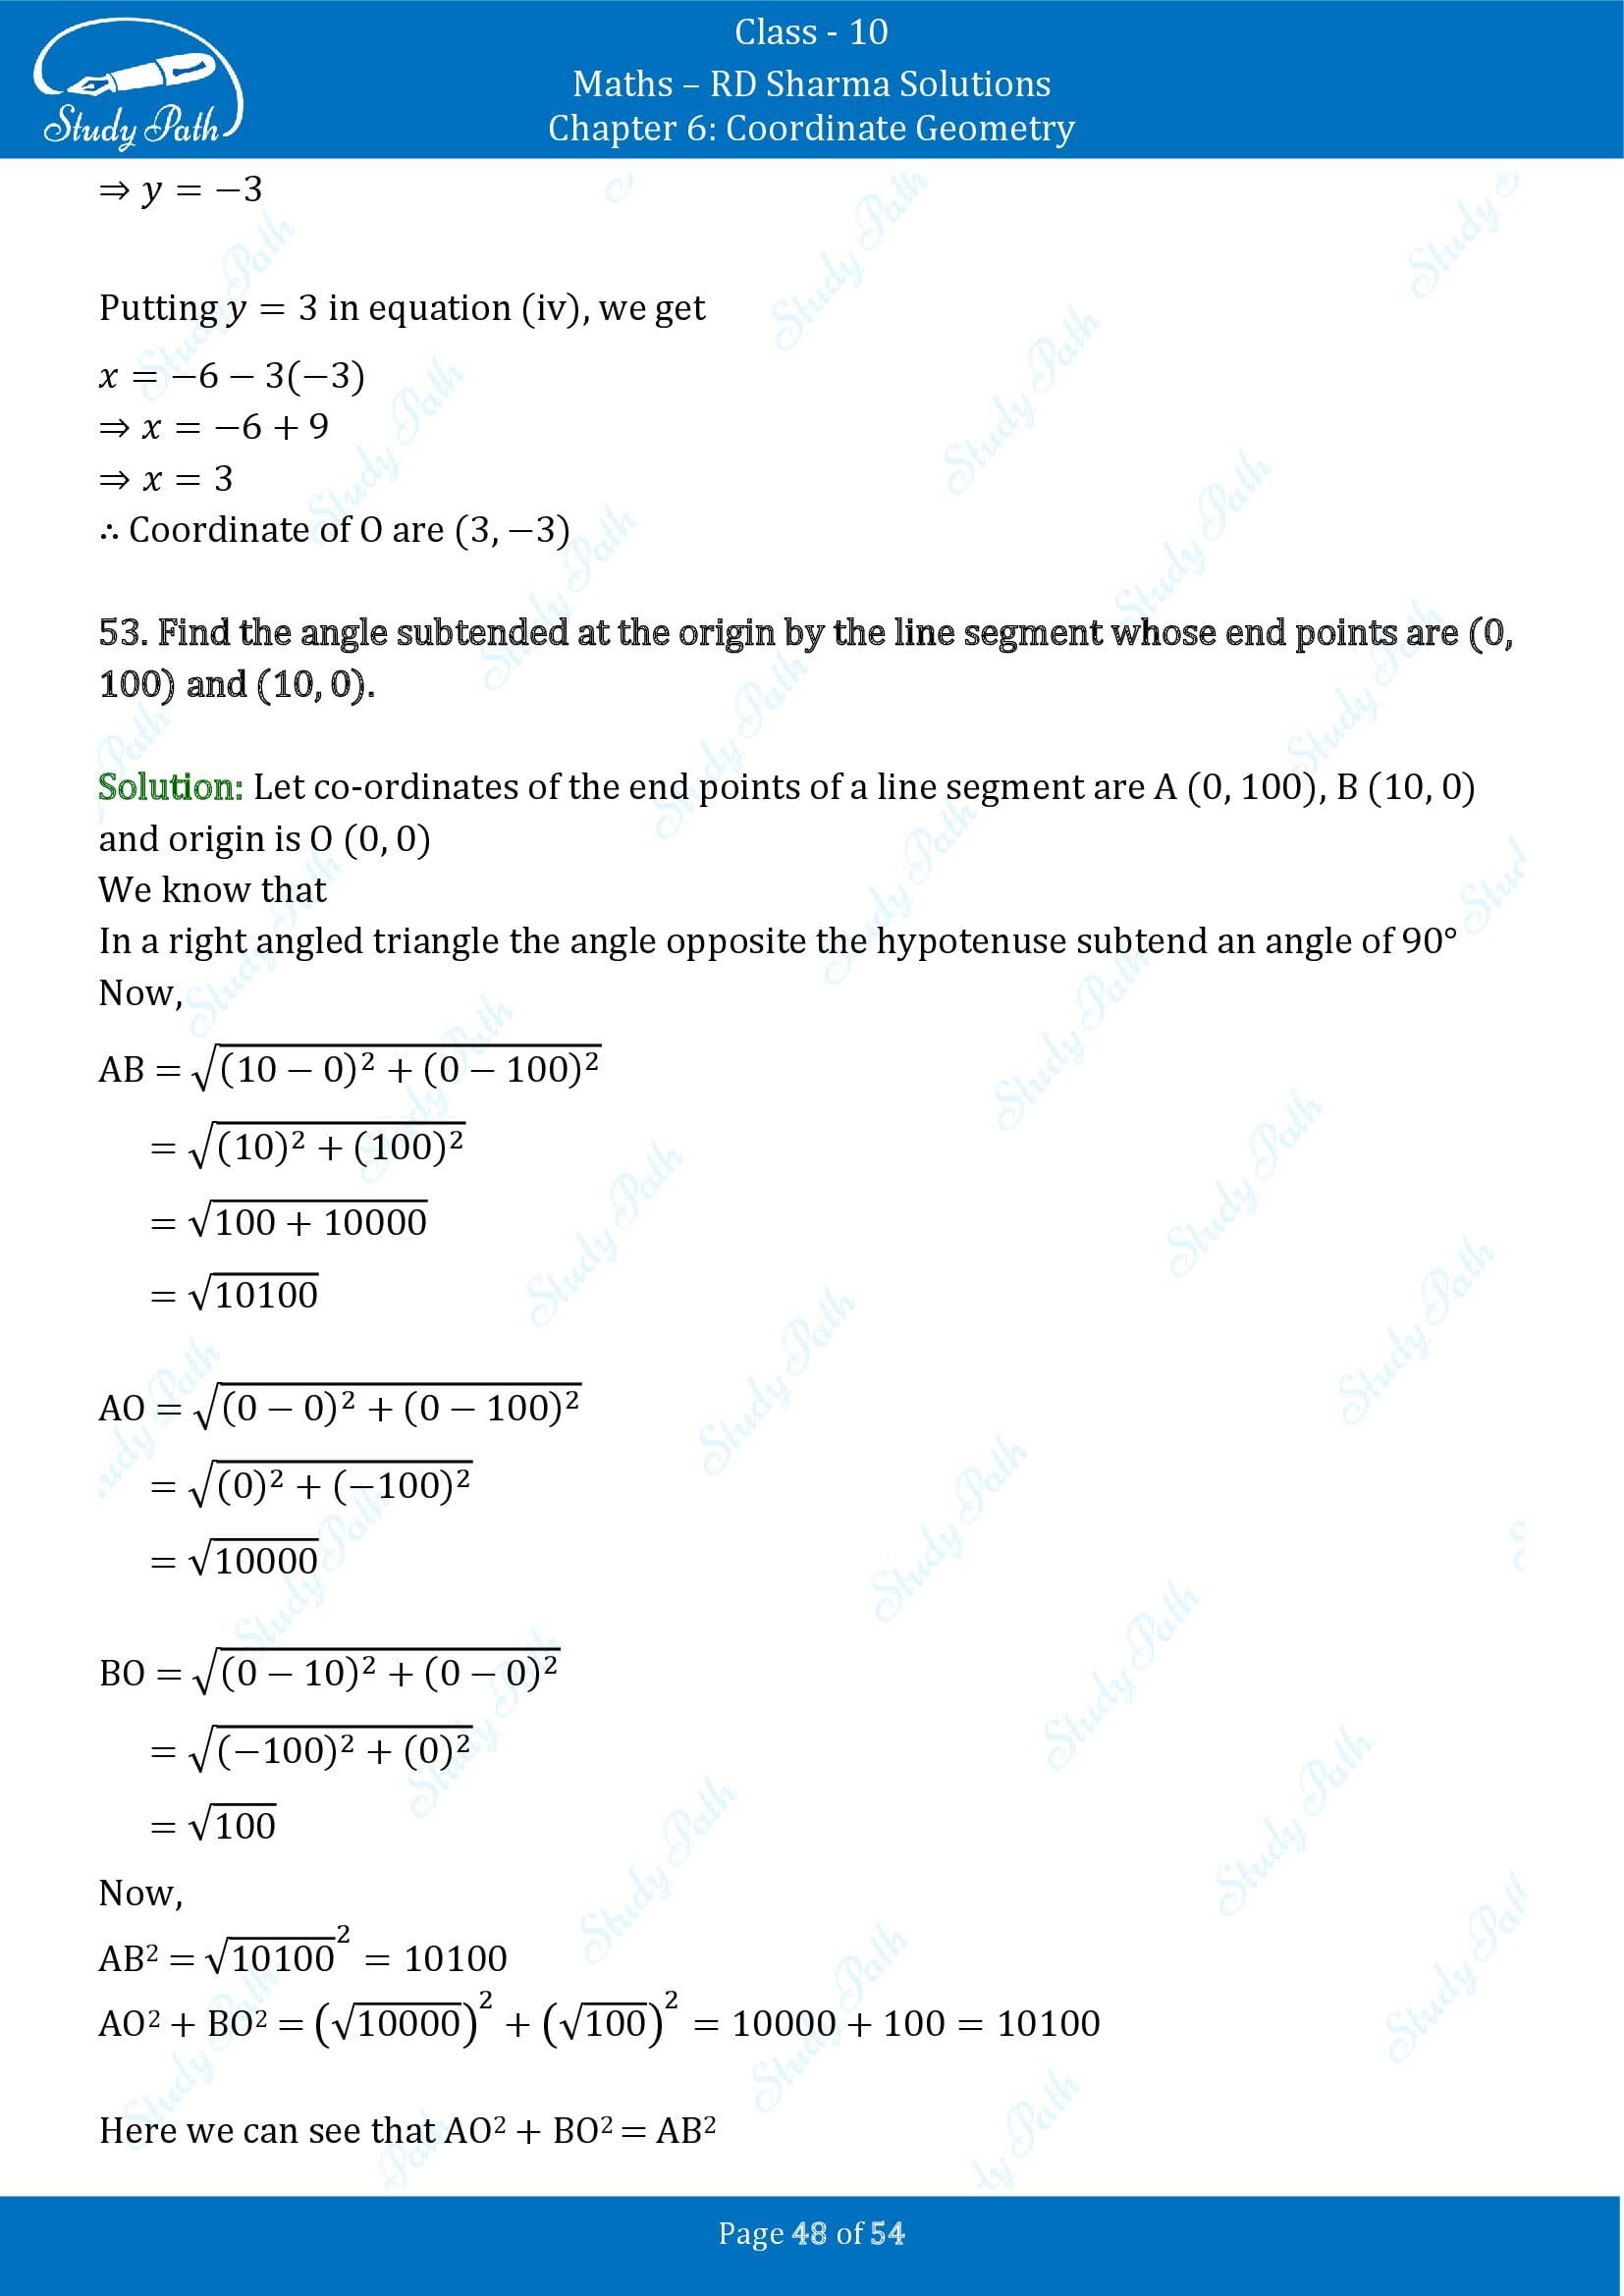 RD Sharma Solutions Class 10 Chapter 6 Coordinate Geometry Exercise 6.2 0048